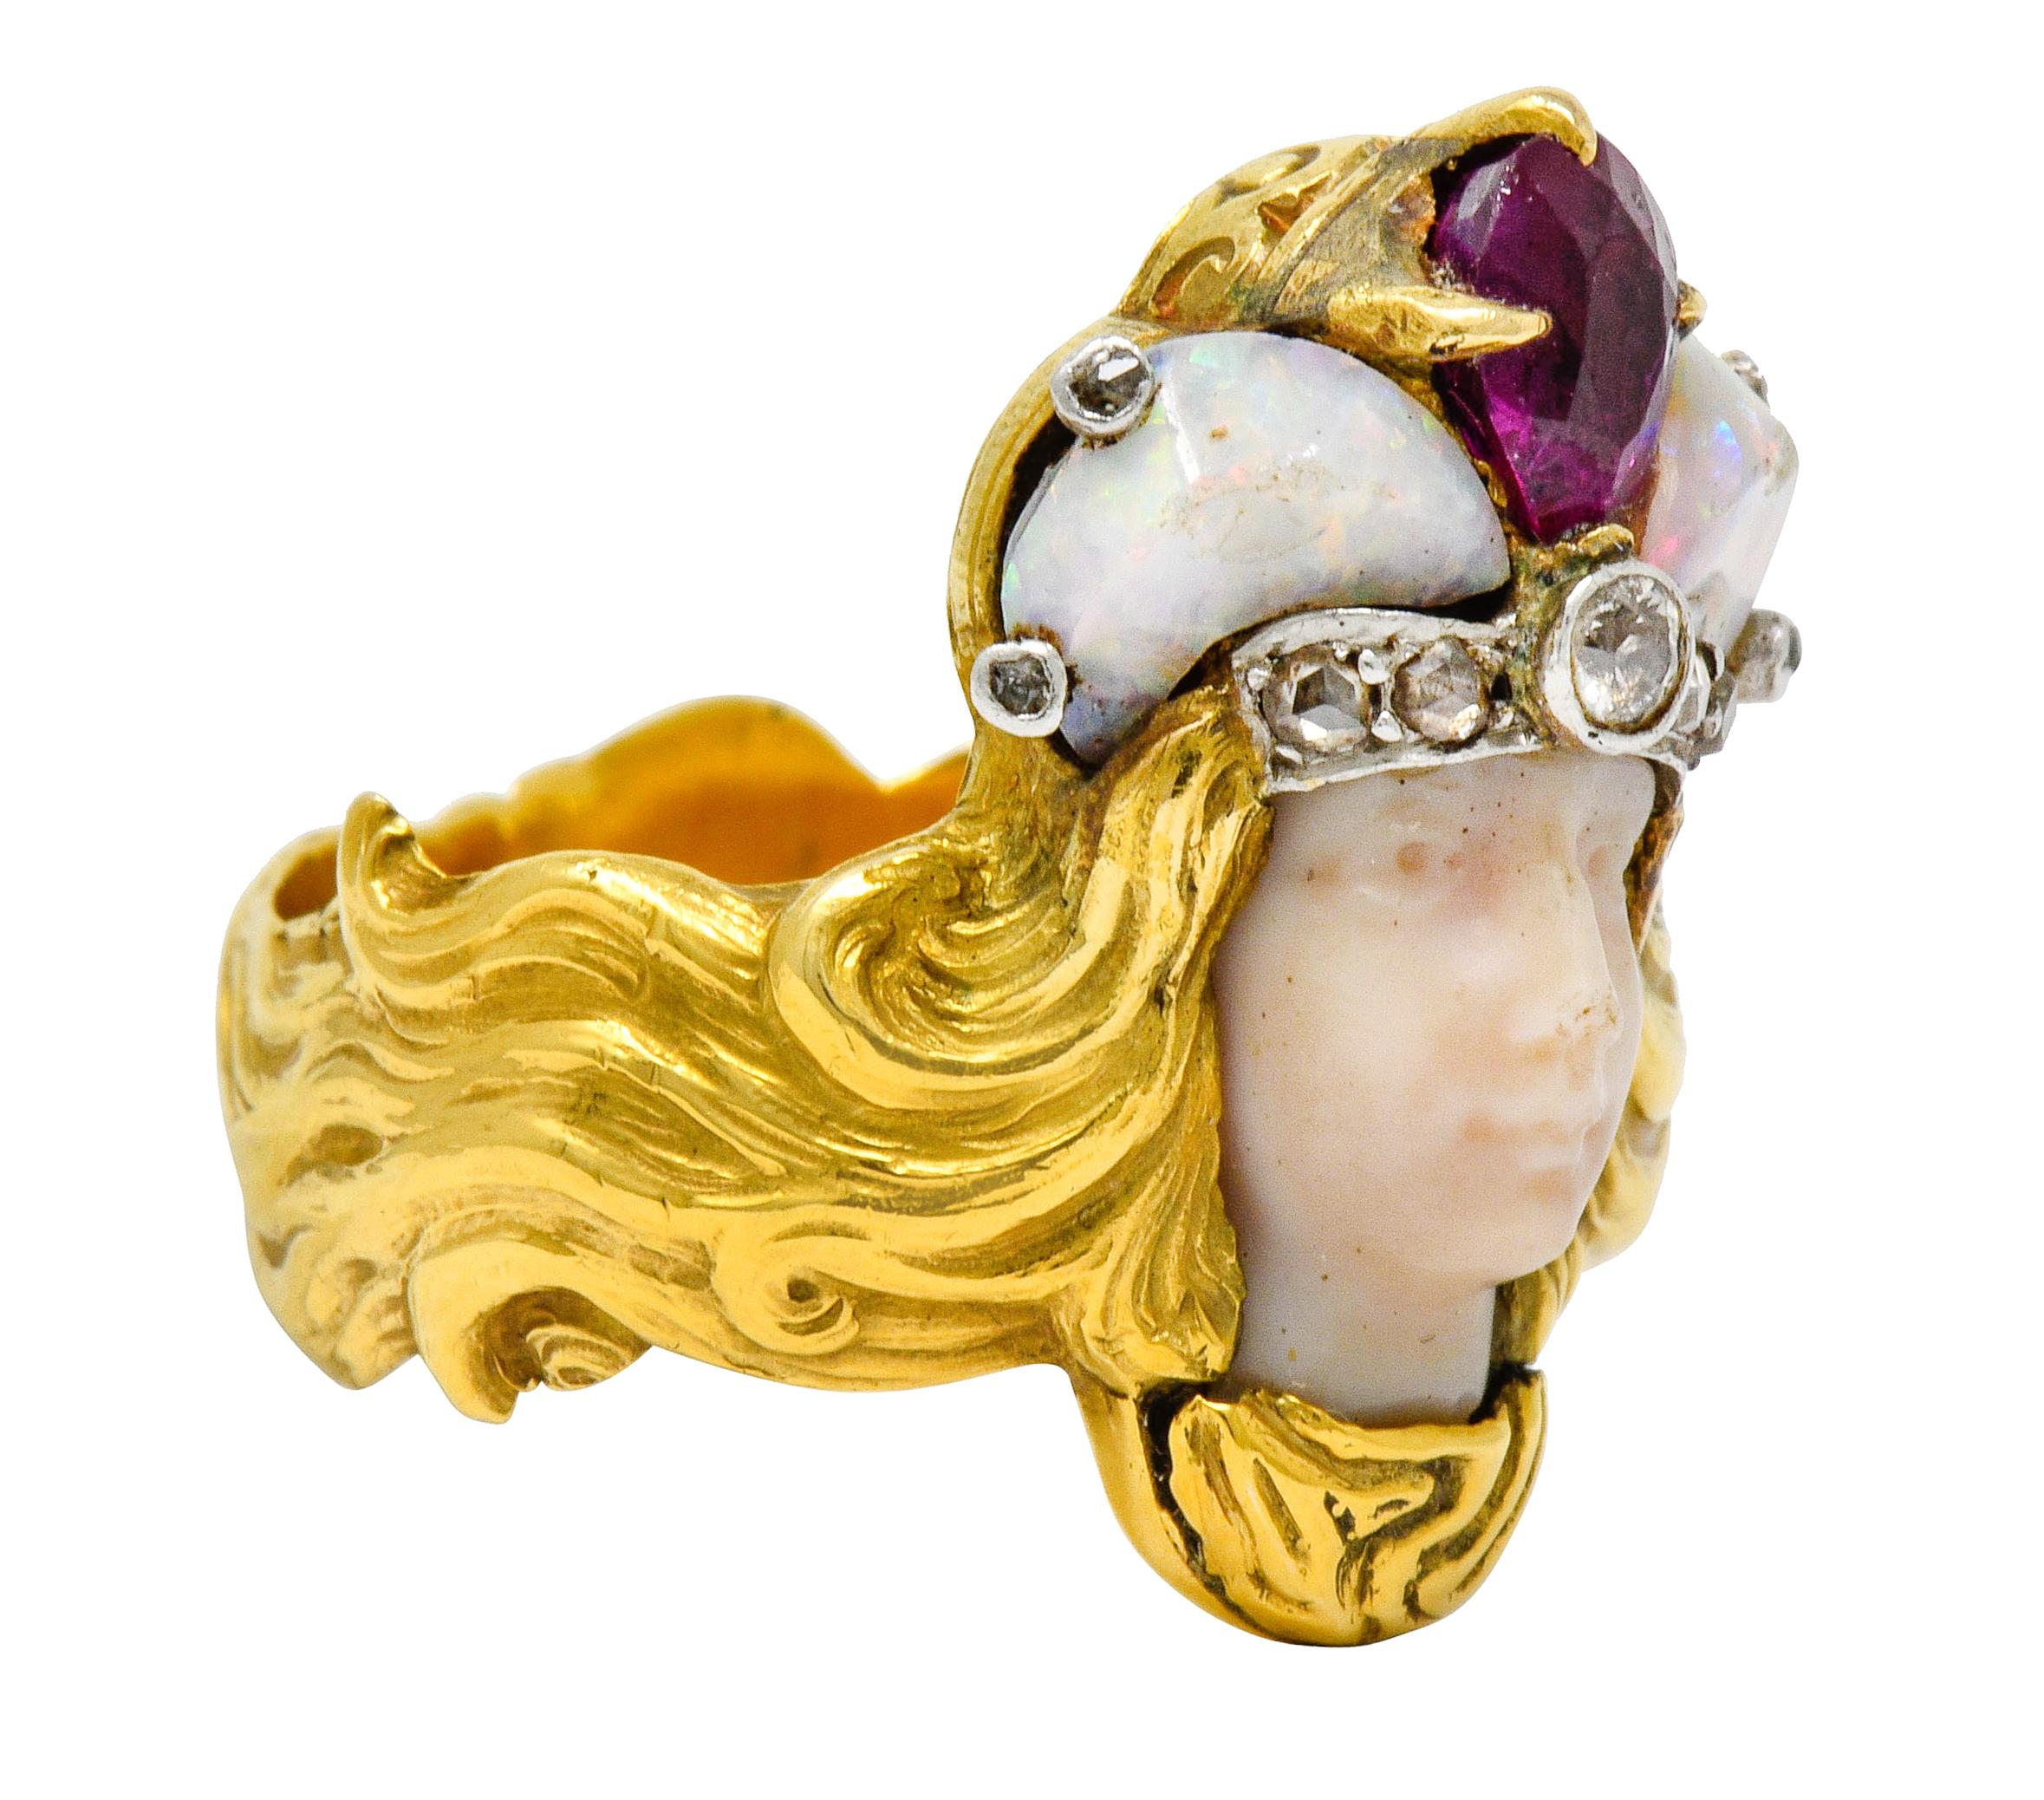 Designed as an empress carved from beige hardstone topped by a gemmed crown

Featuring a pear cut ruby, two tumbled opal, and accented by rose cut and old European cut diamonds

Hairline crack in one opal and chip at nose; consistent with age

Band